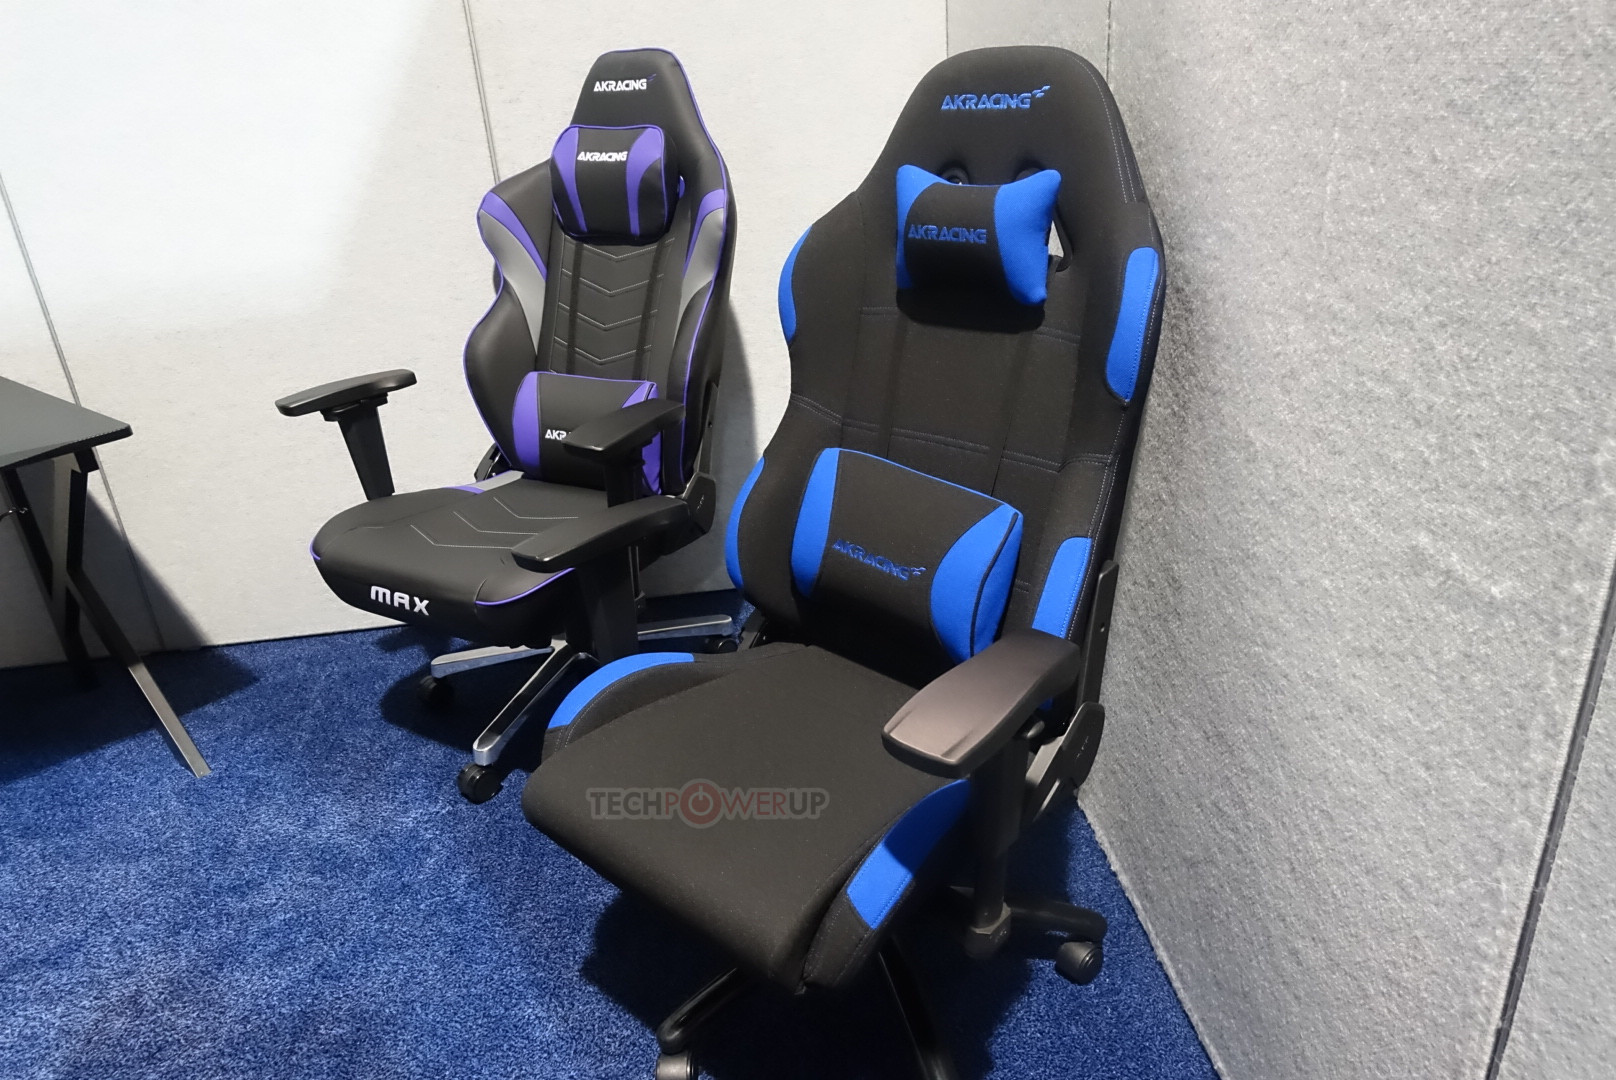 AKRacing Shows Off Gaming Chairs at CES 2018 - EVGA Forums - 1616 x 1080 jpeg 444kB